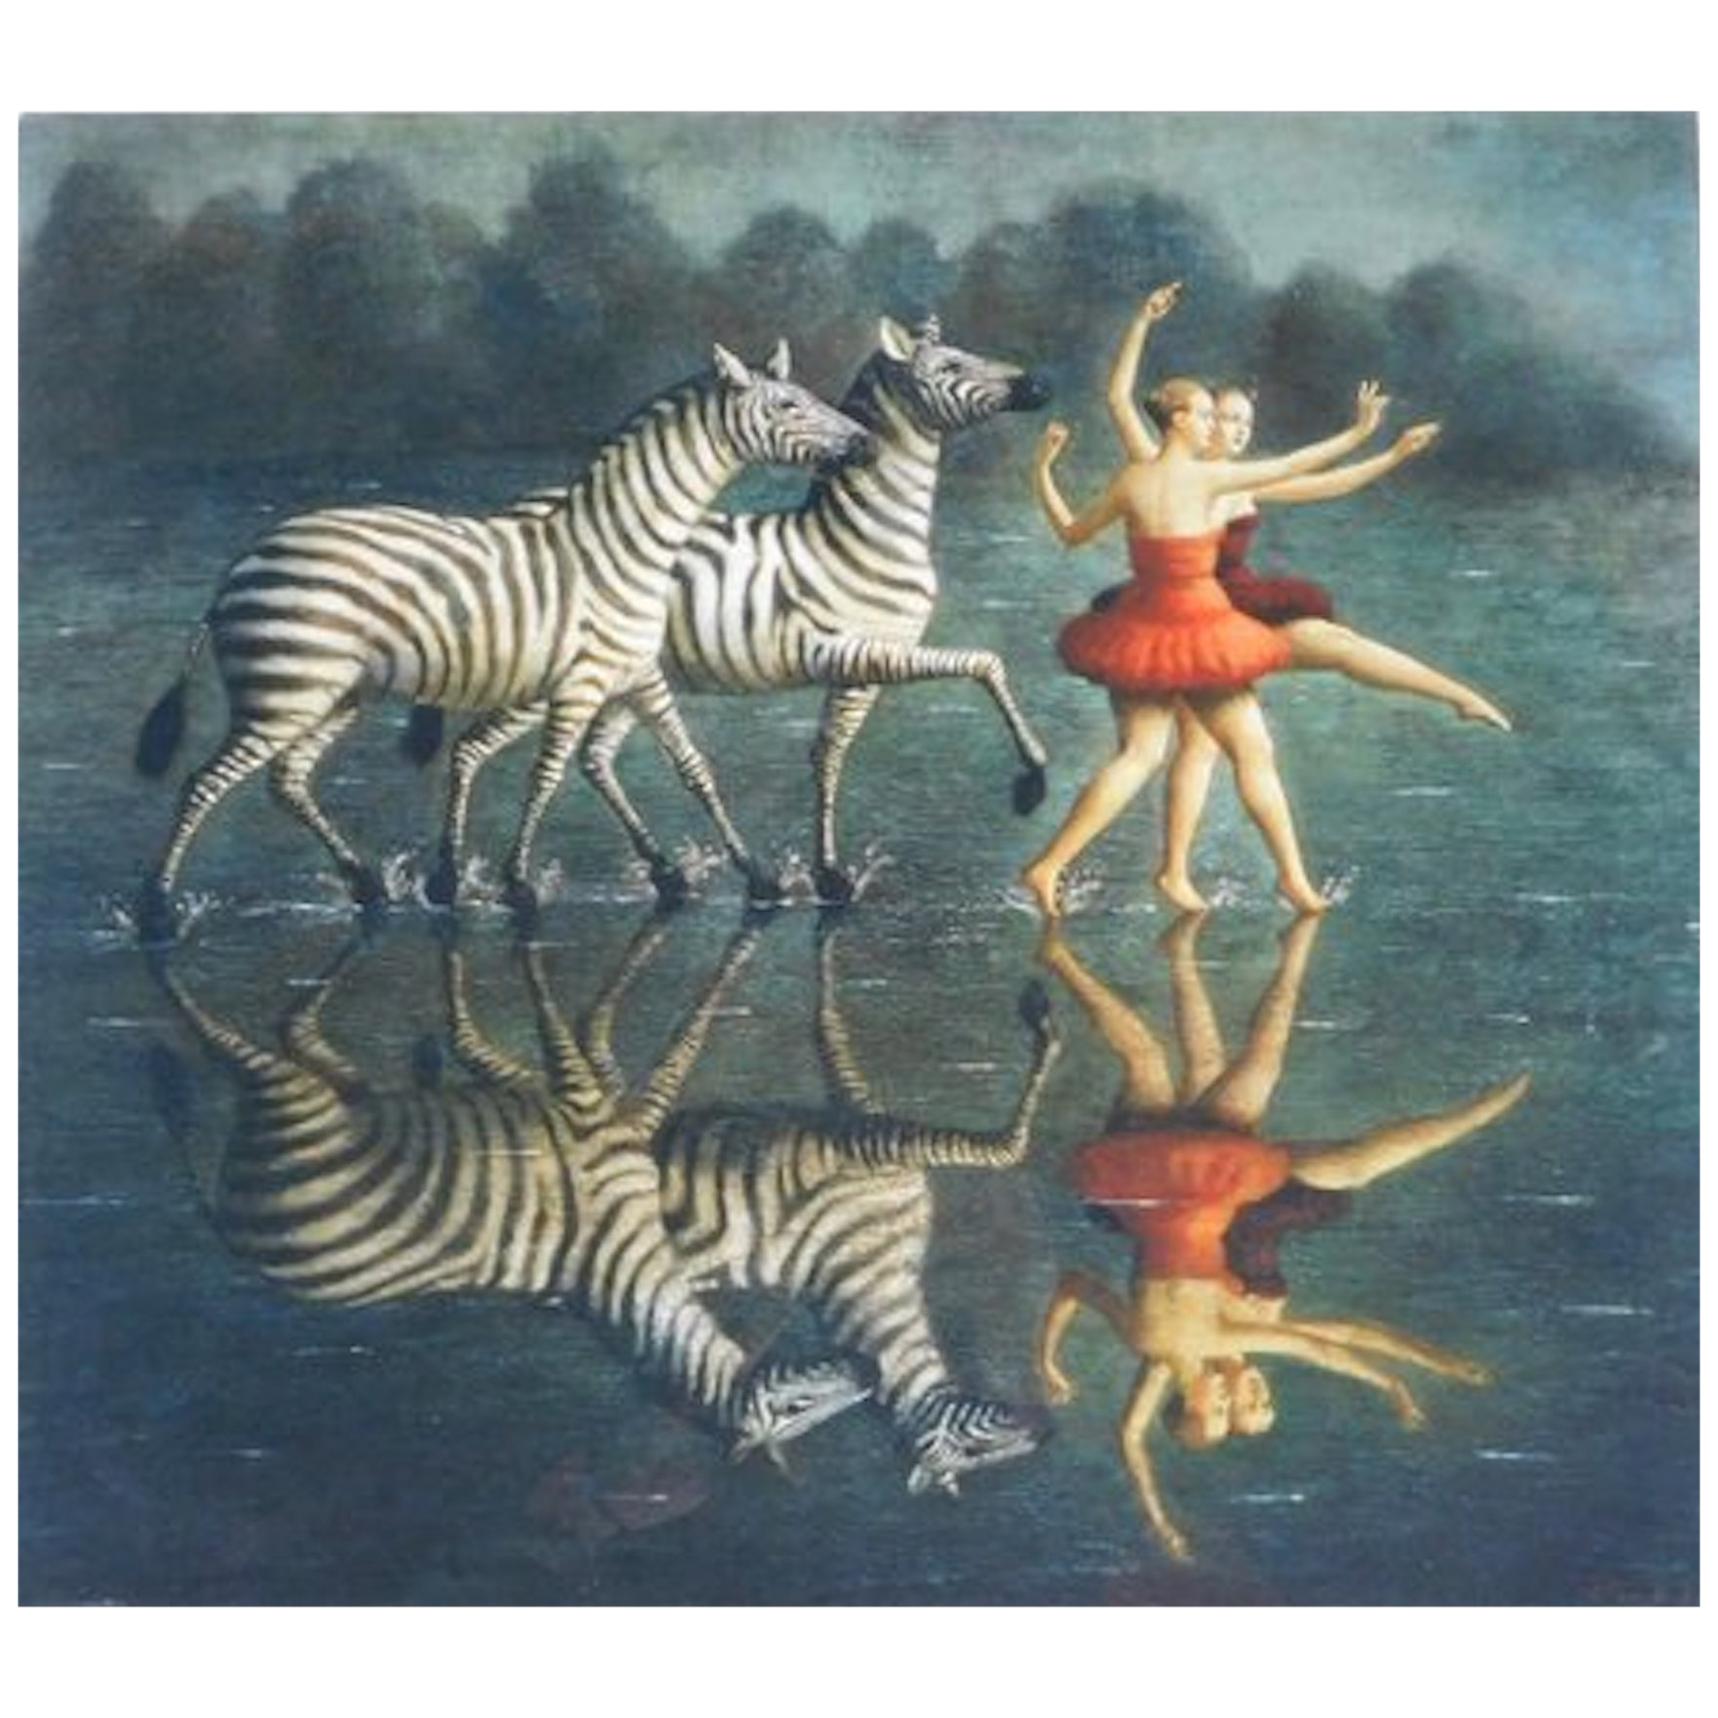 Limited Edition Ilya Zomb Giclee Print " Pleasures of Walking on Water" For Sale